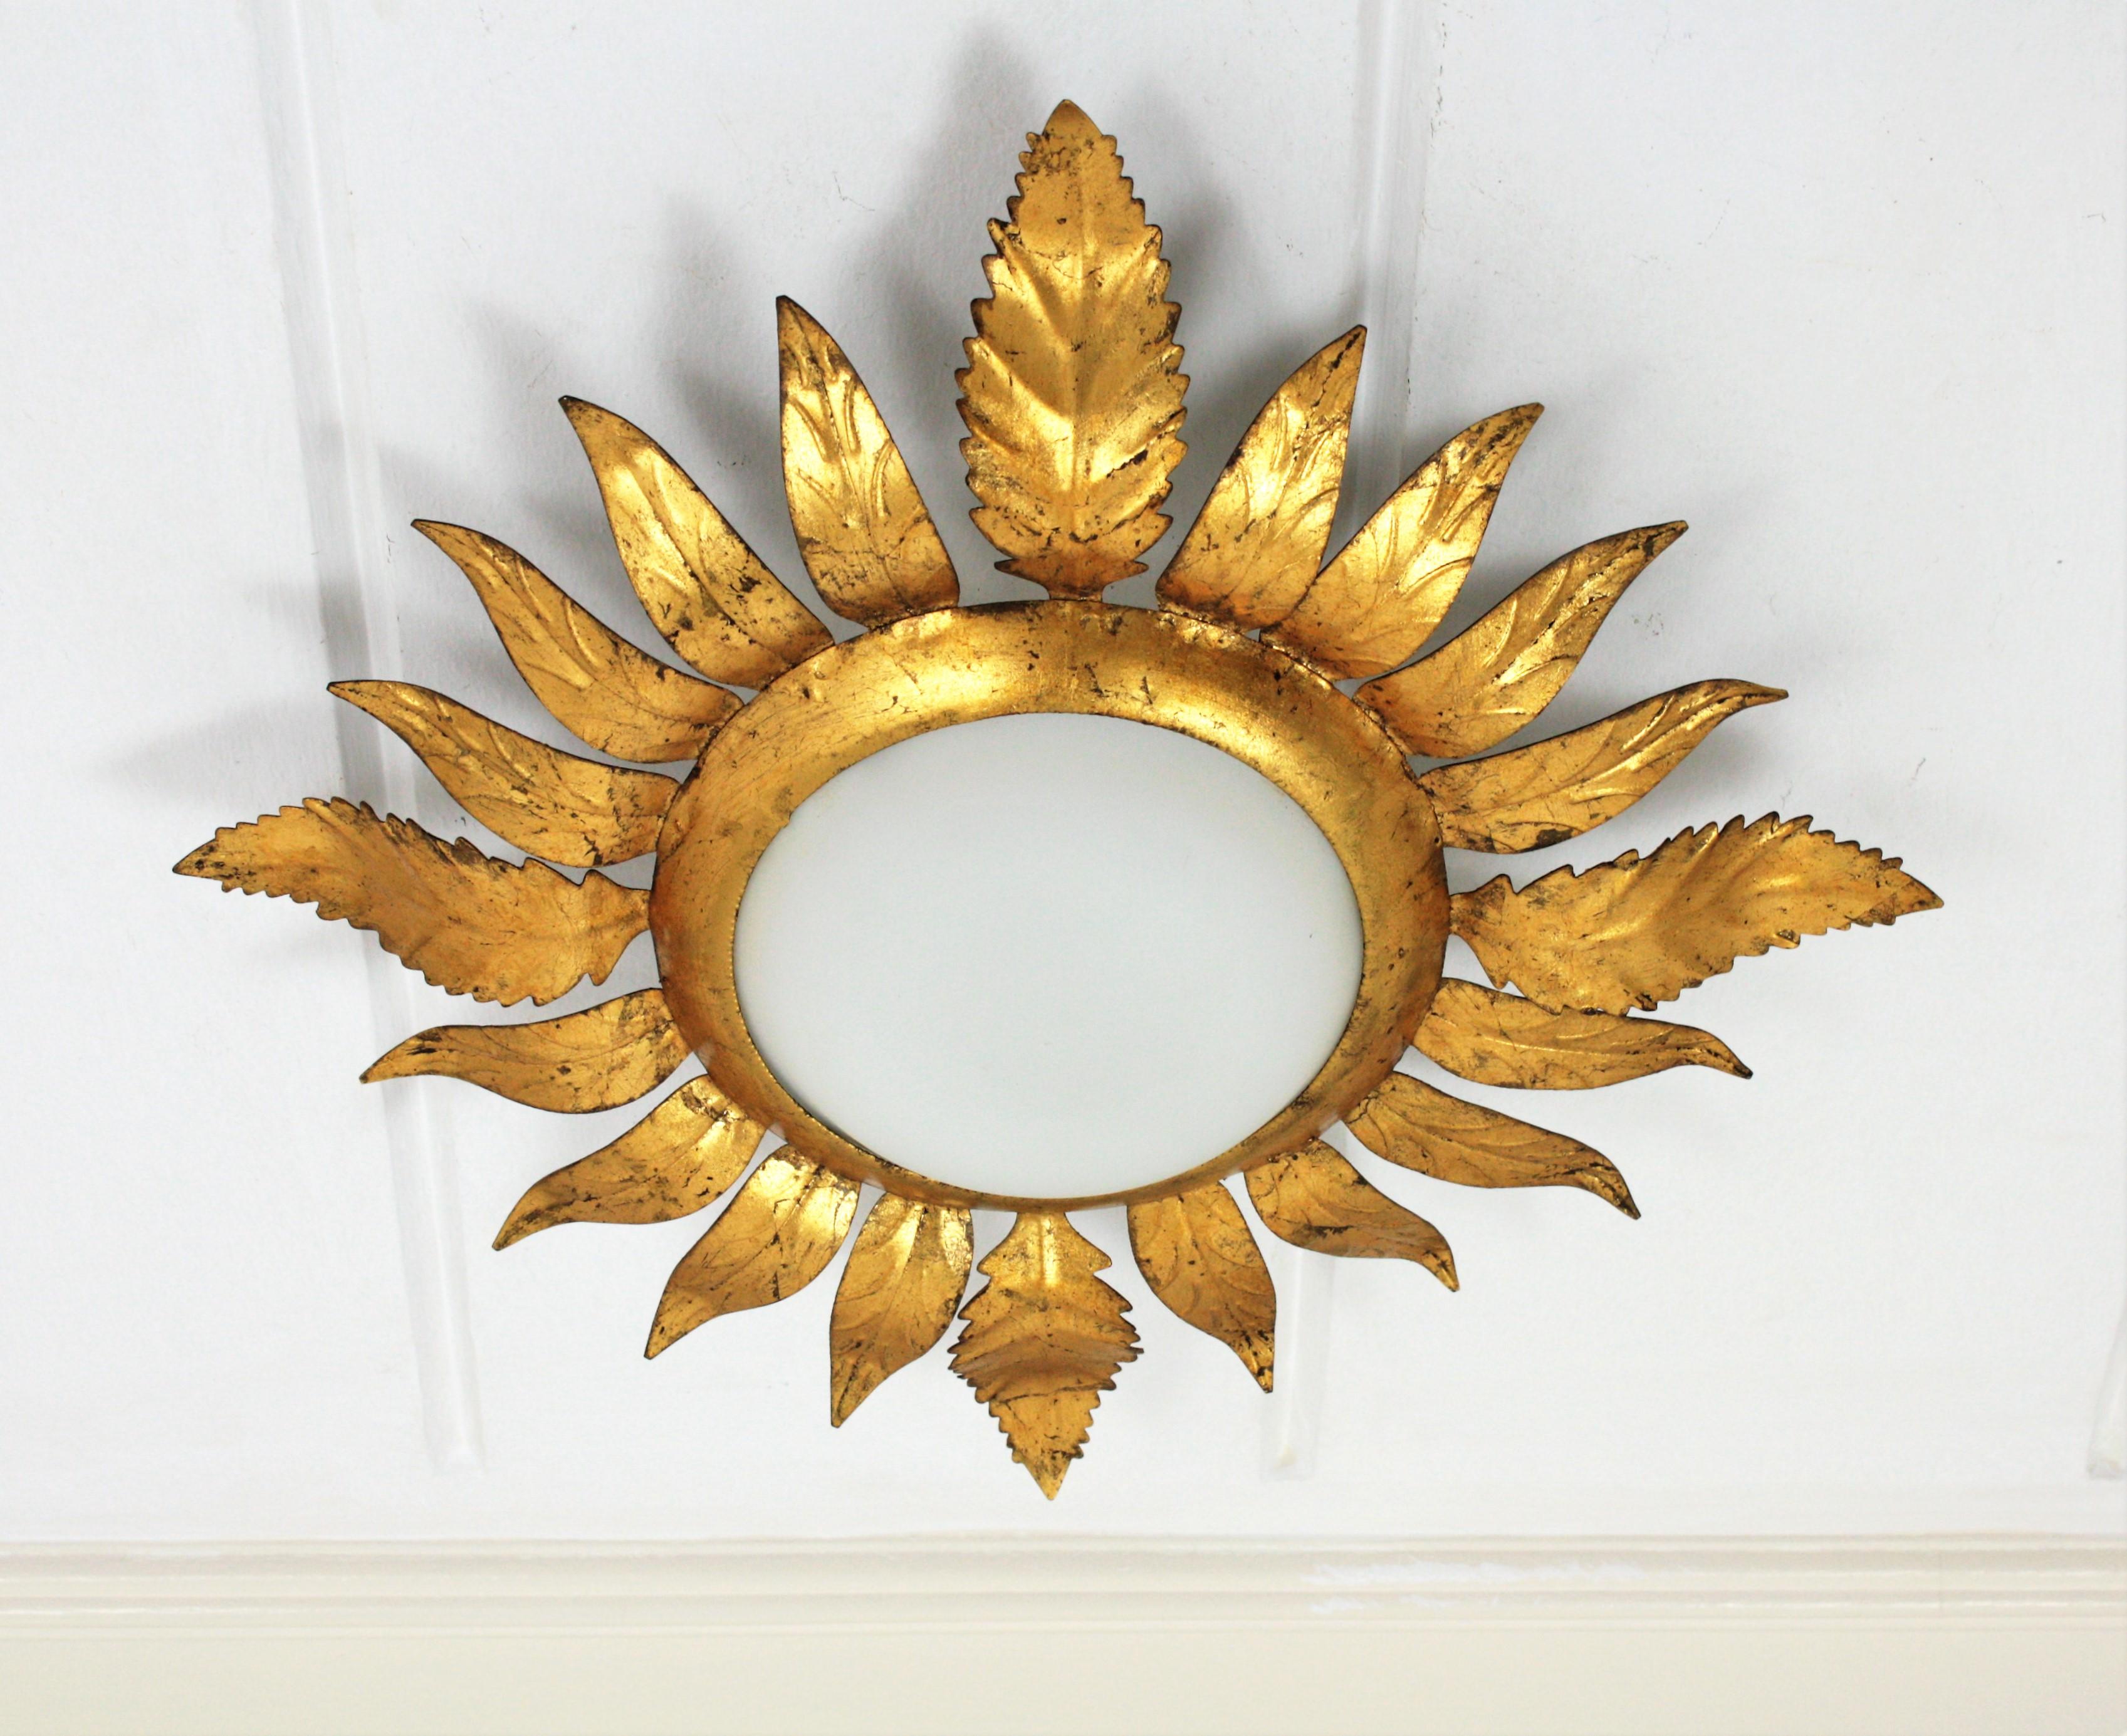 A nice gilt iron flower / sunburst flush mount with leafed frame. France, 1950s
This light fixture features an opaline glass circular shade surrounded by a frame of hand-hammered iron leaves with gold leaf finishing.
It can work as ceiling light and